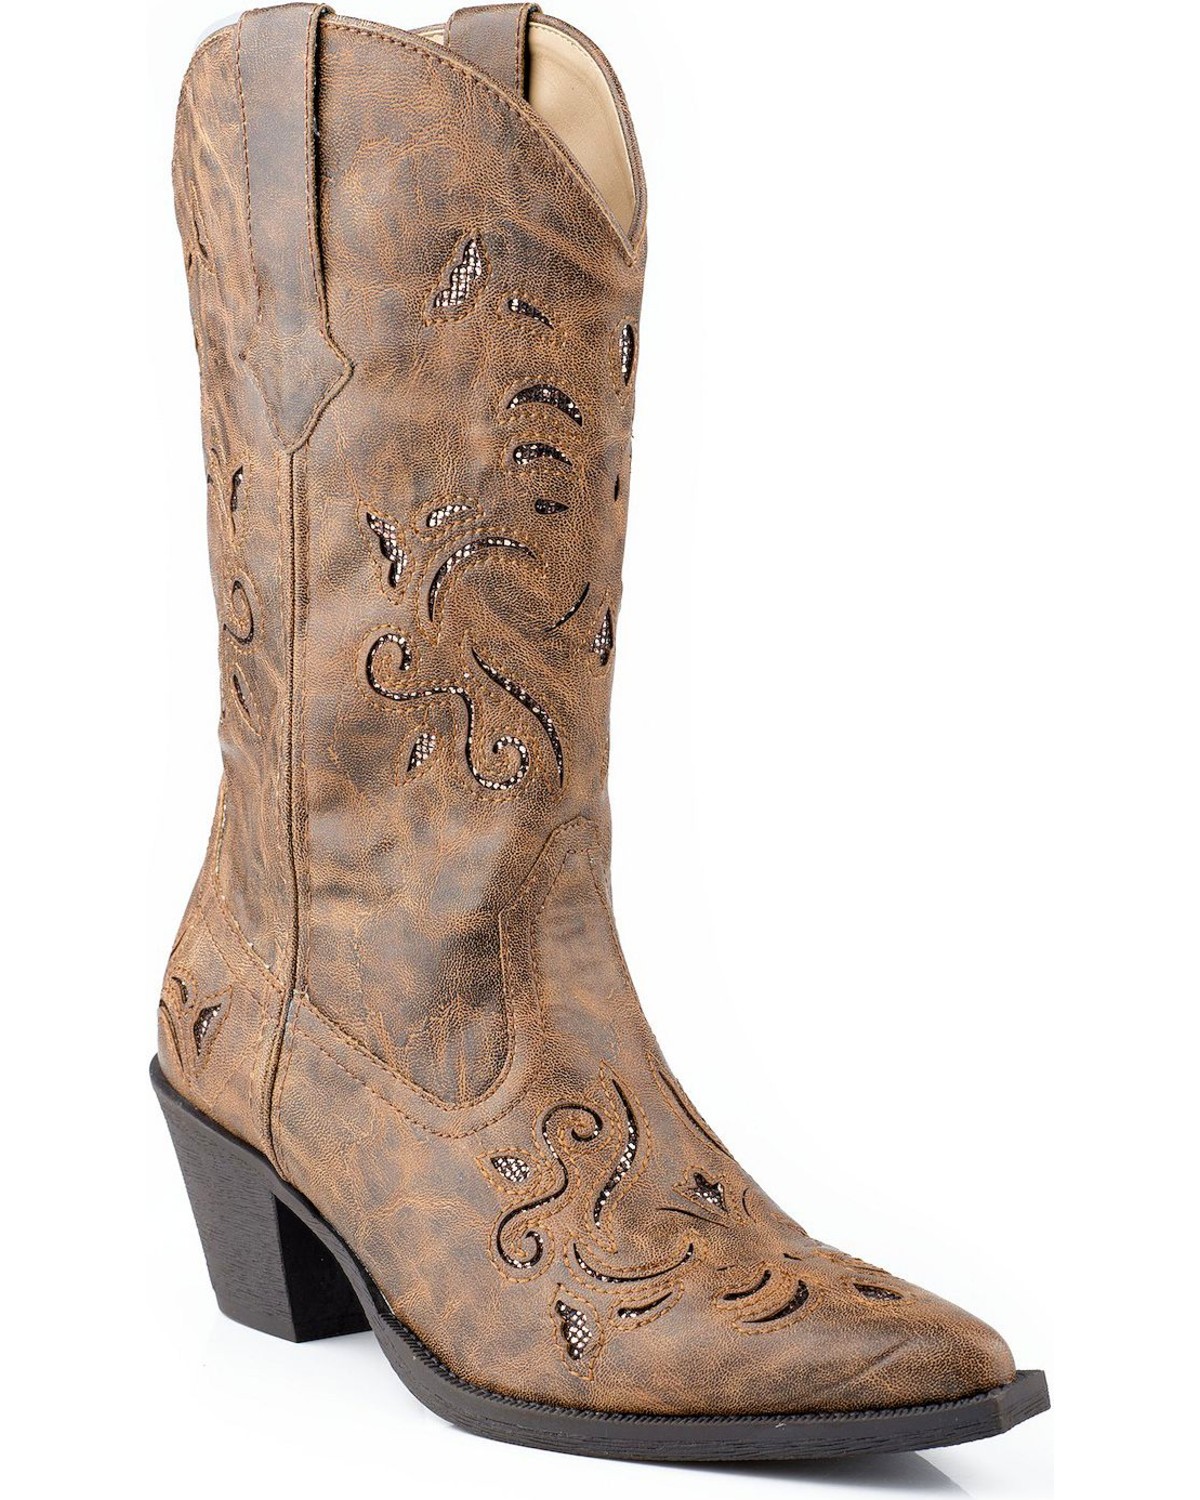 Roper Vintage Glittery Inlay Cowgirl Boots - Snip Toe